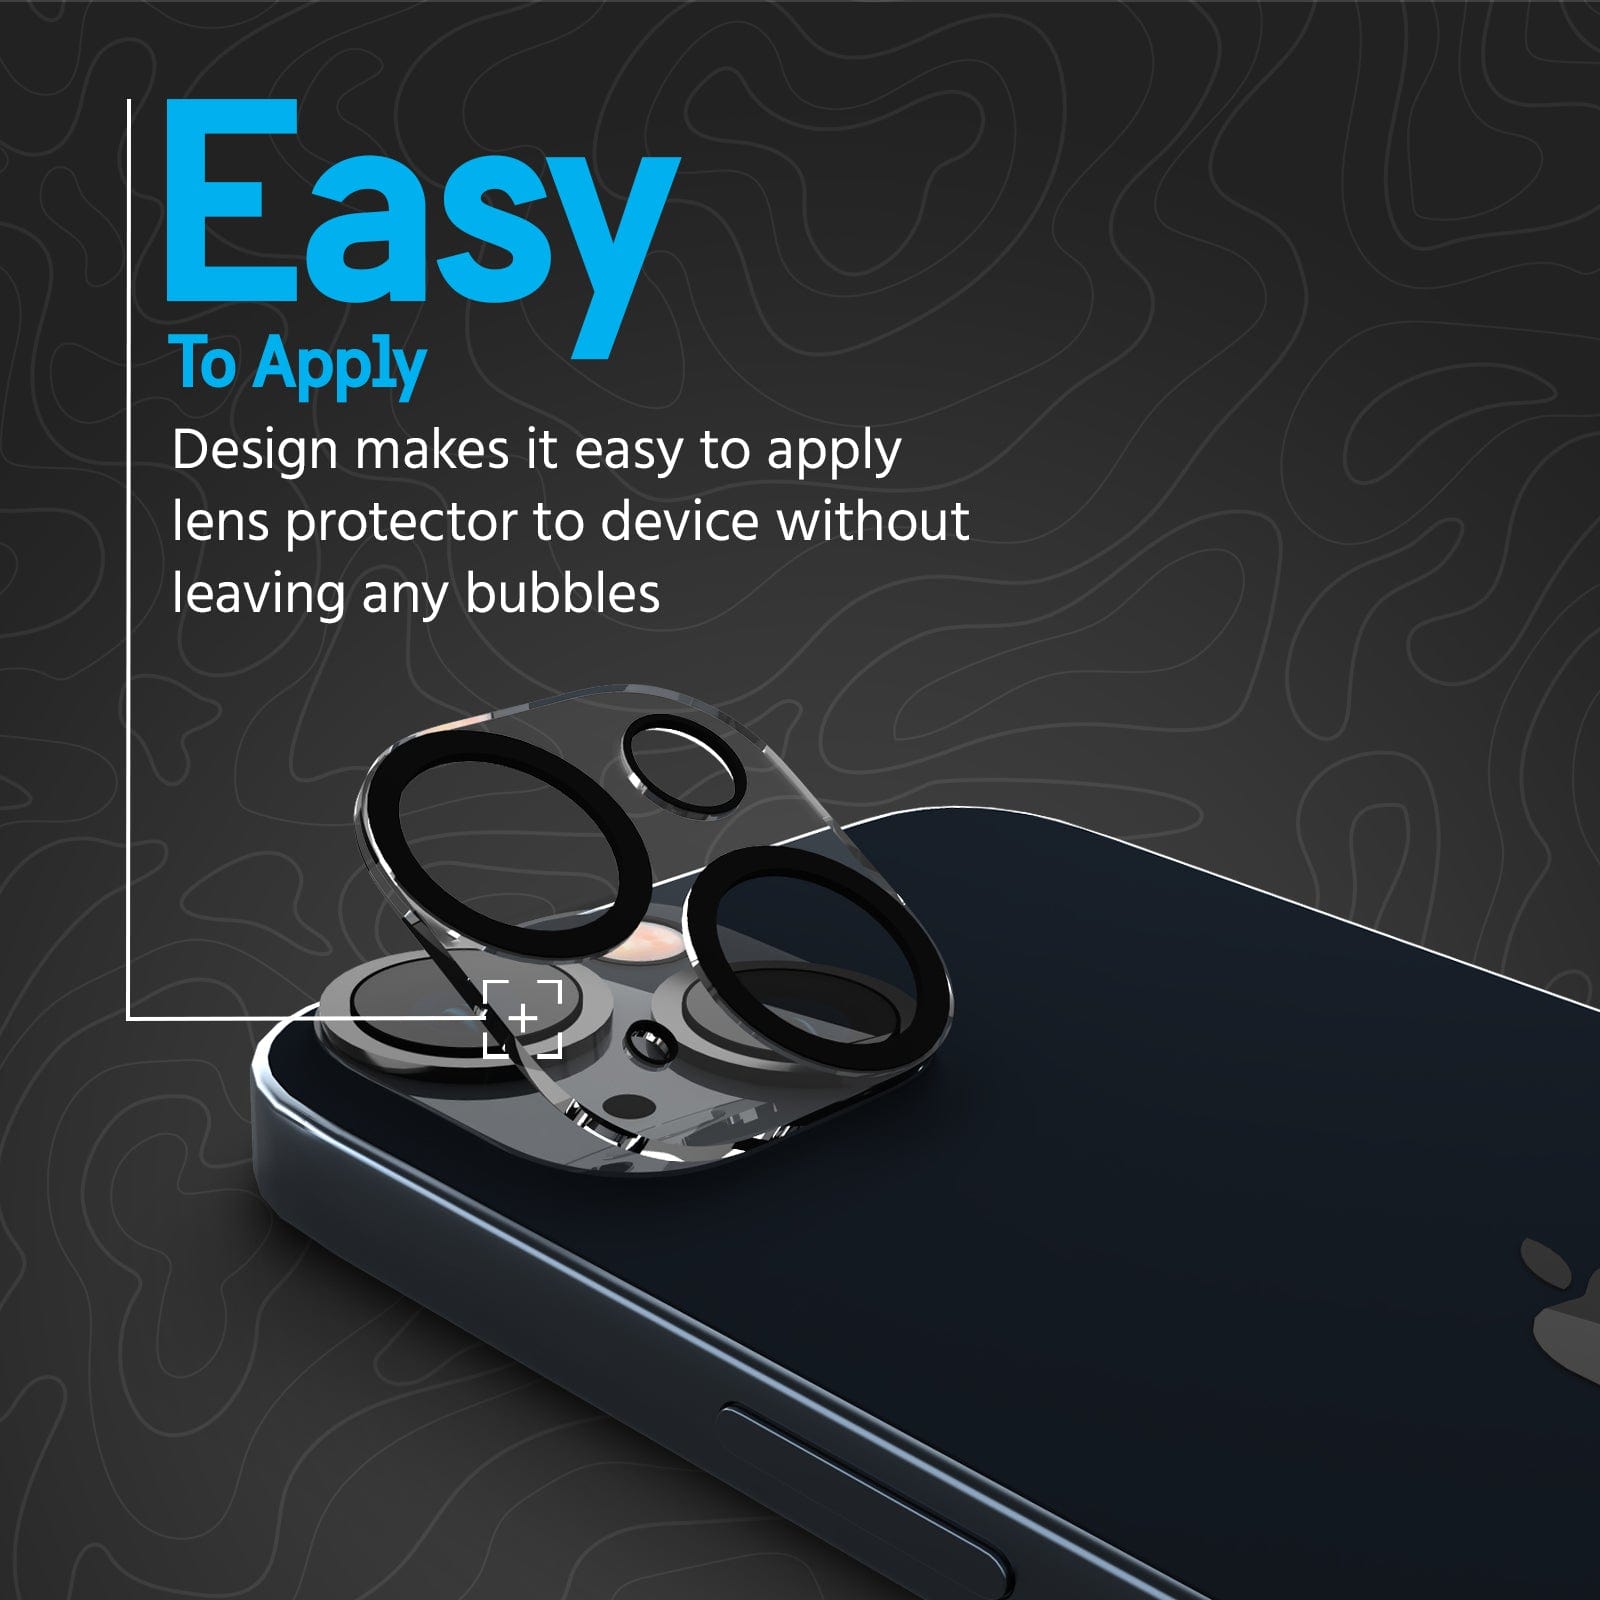 Easy to apply. Design makes it easy to apply lens protector to device without leaving any bubbles. 